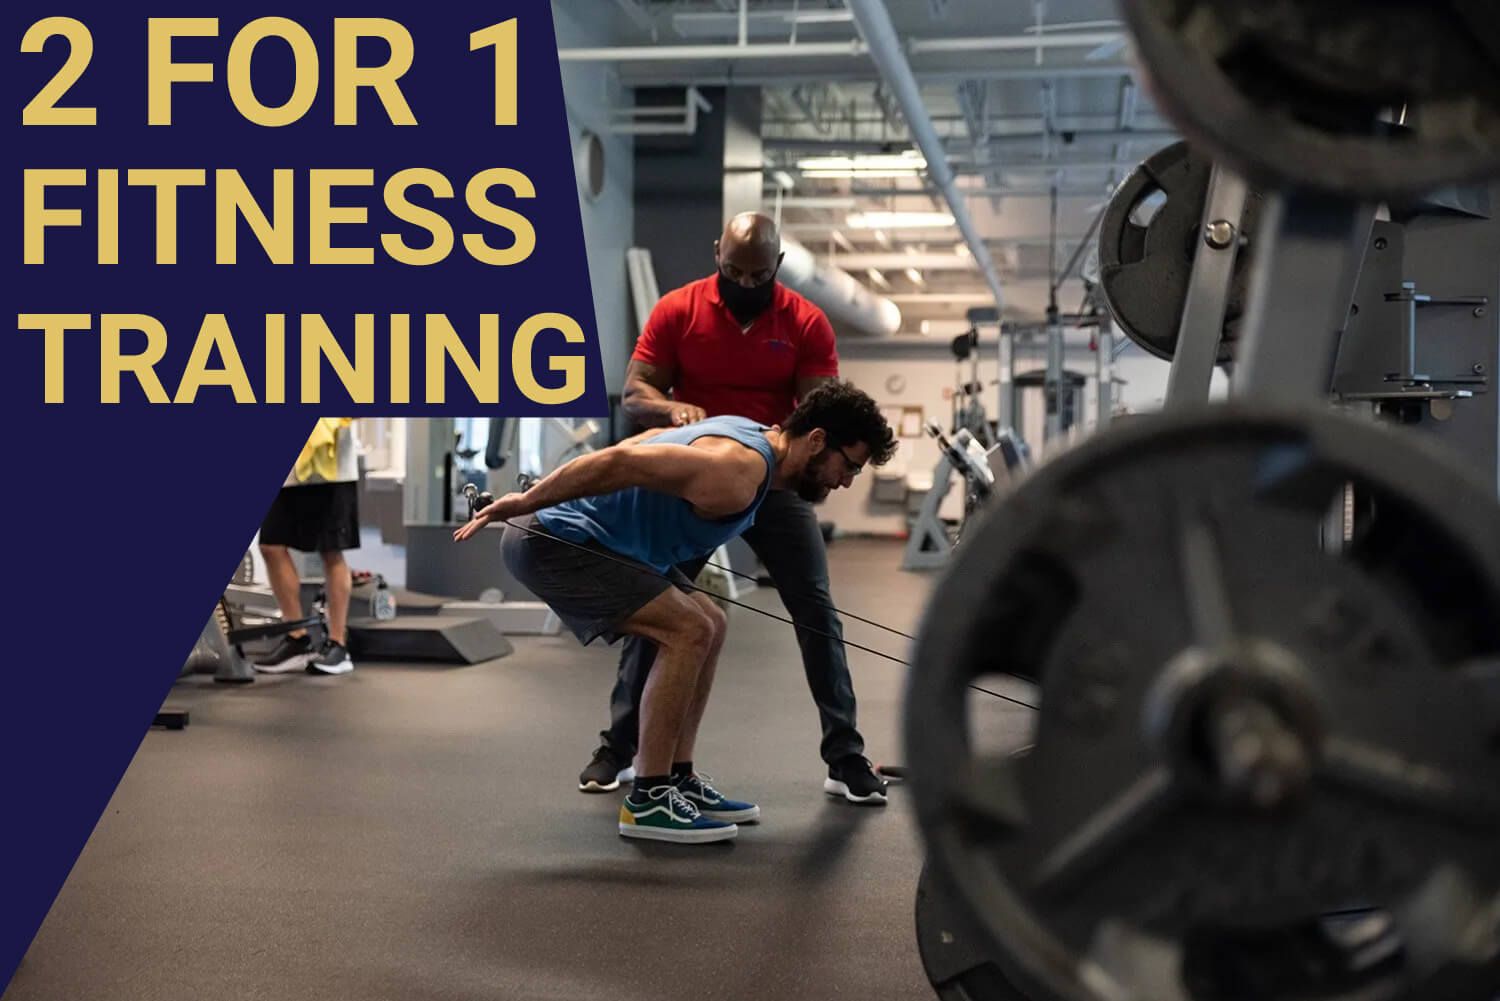 2 for 1 Fitness Training